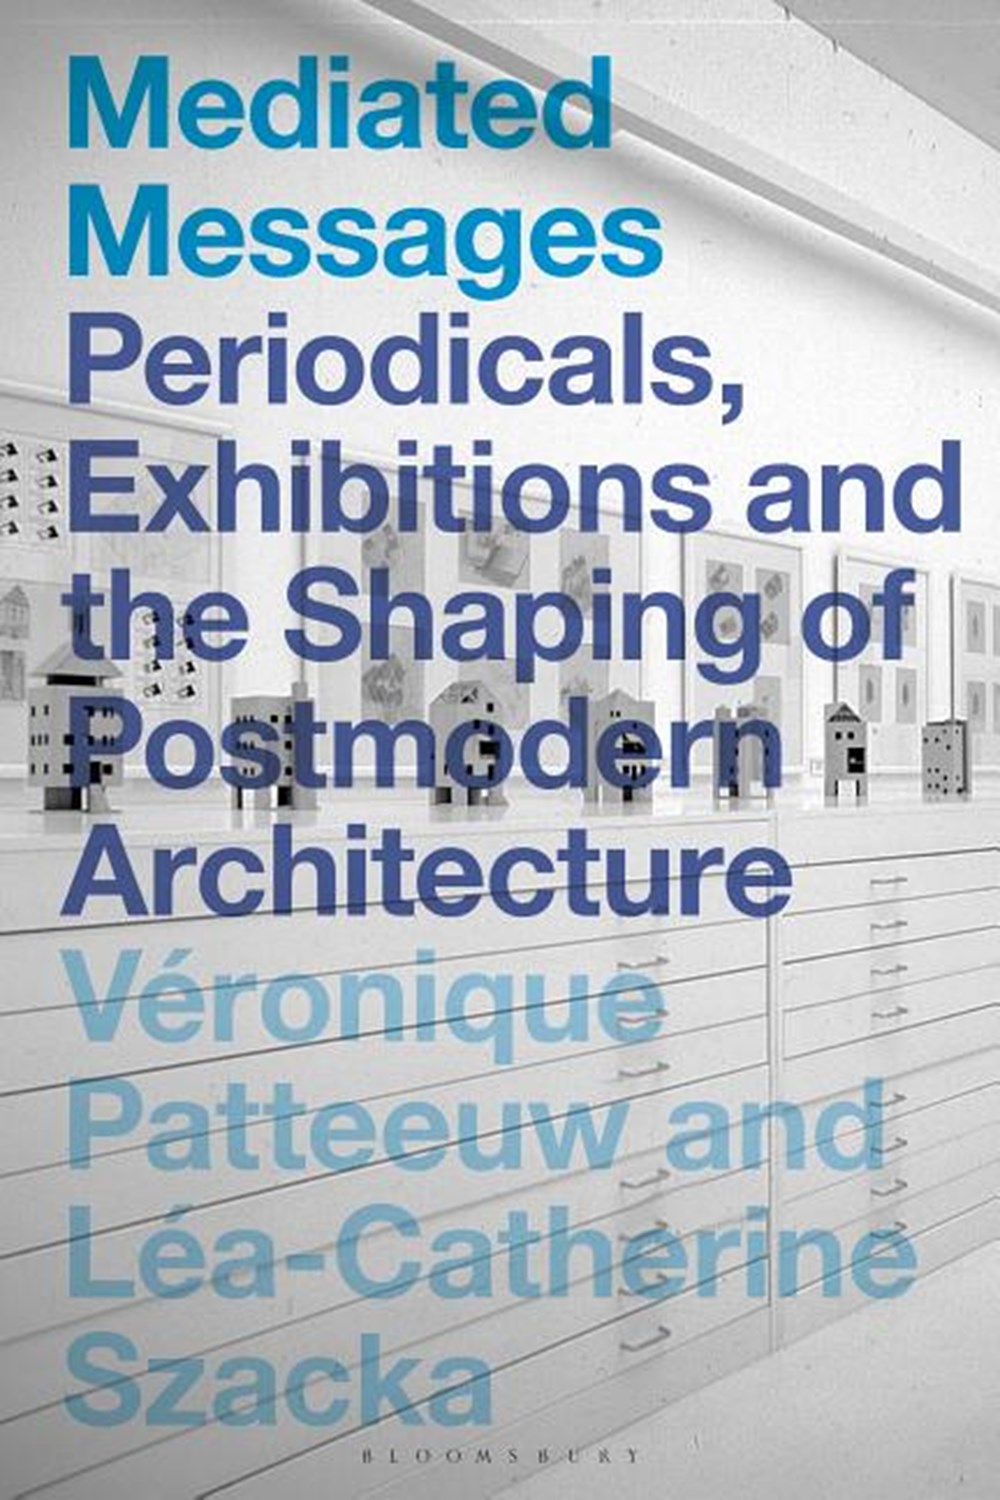 Mediated Messages: Periodicals, Exhibitions and the Shaping of Postmodern Architecture